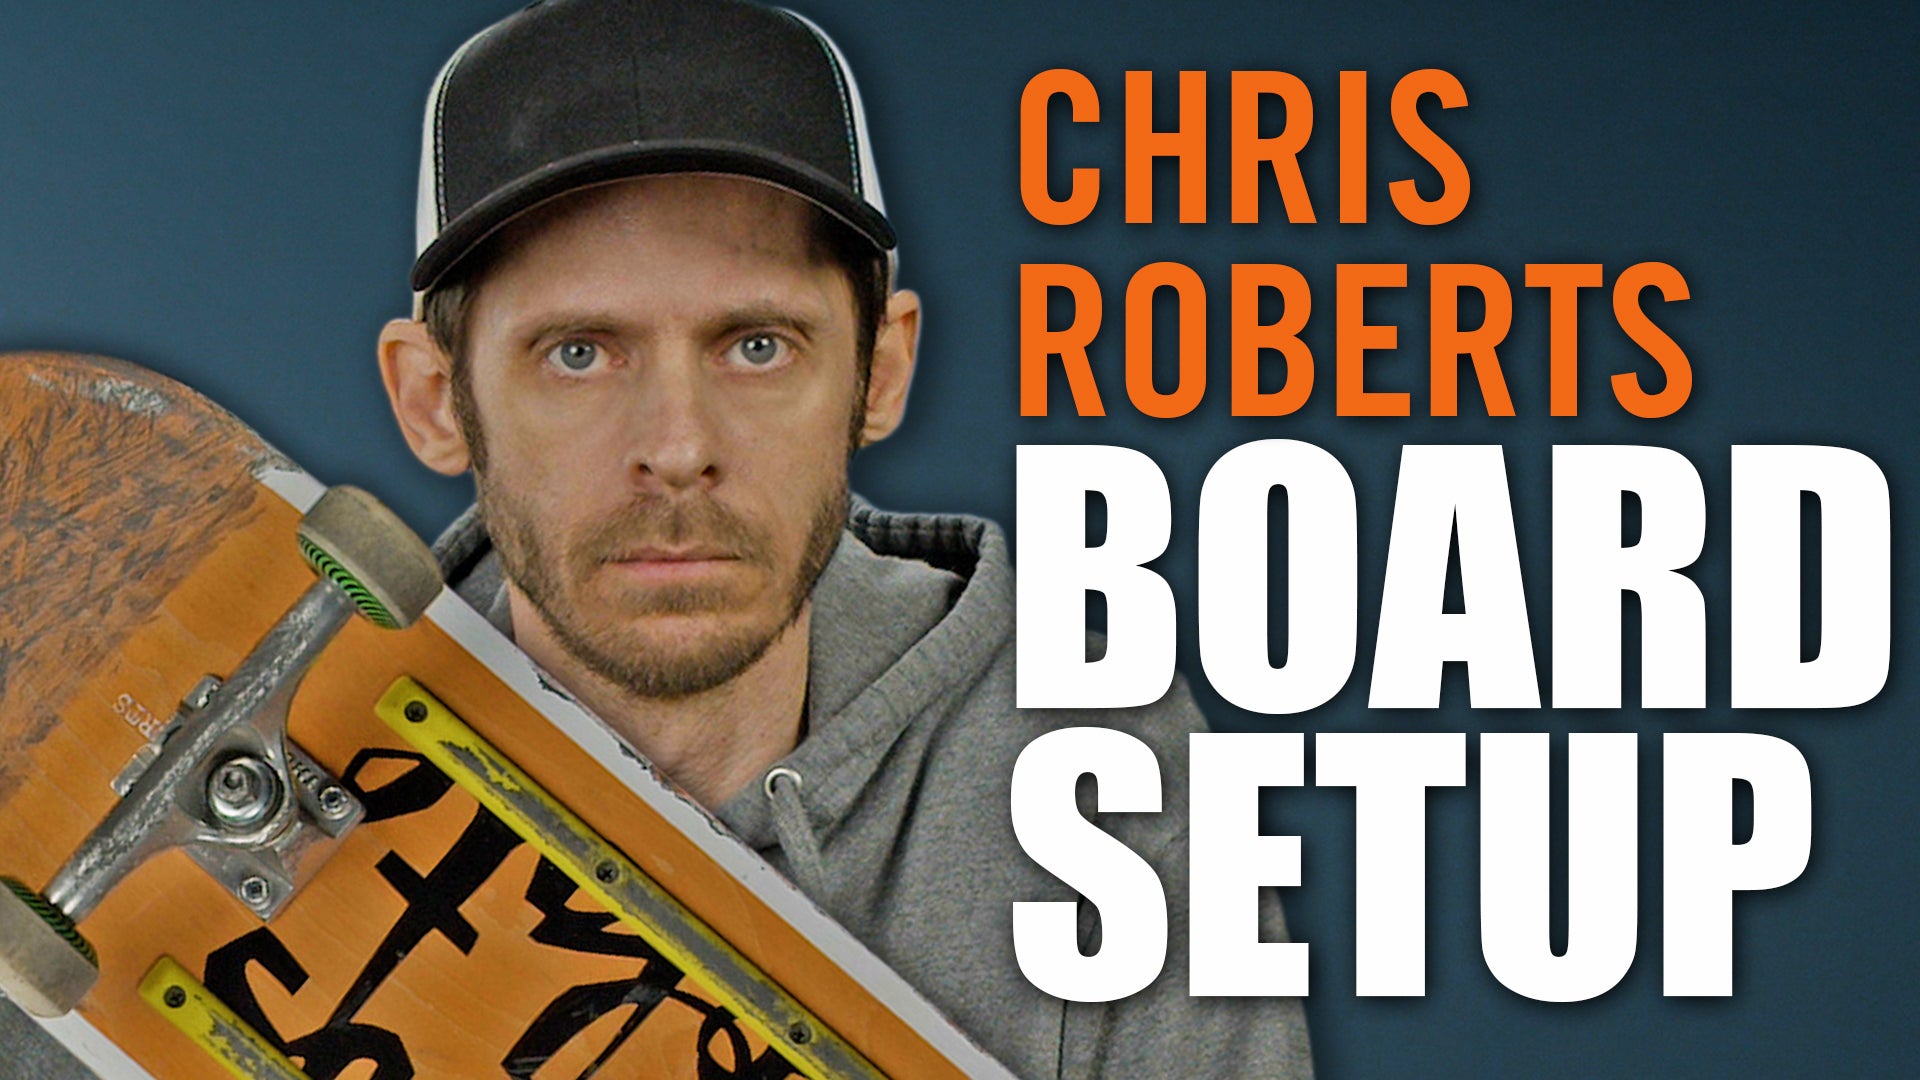 Chris Roberts breaks down his "Twin Paddle" Set-Up